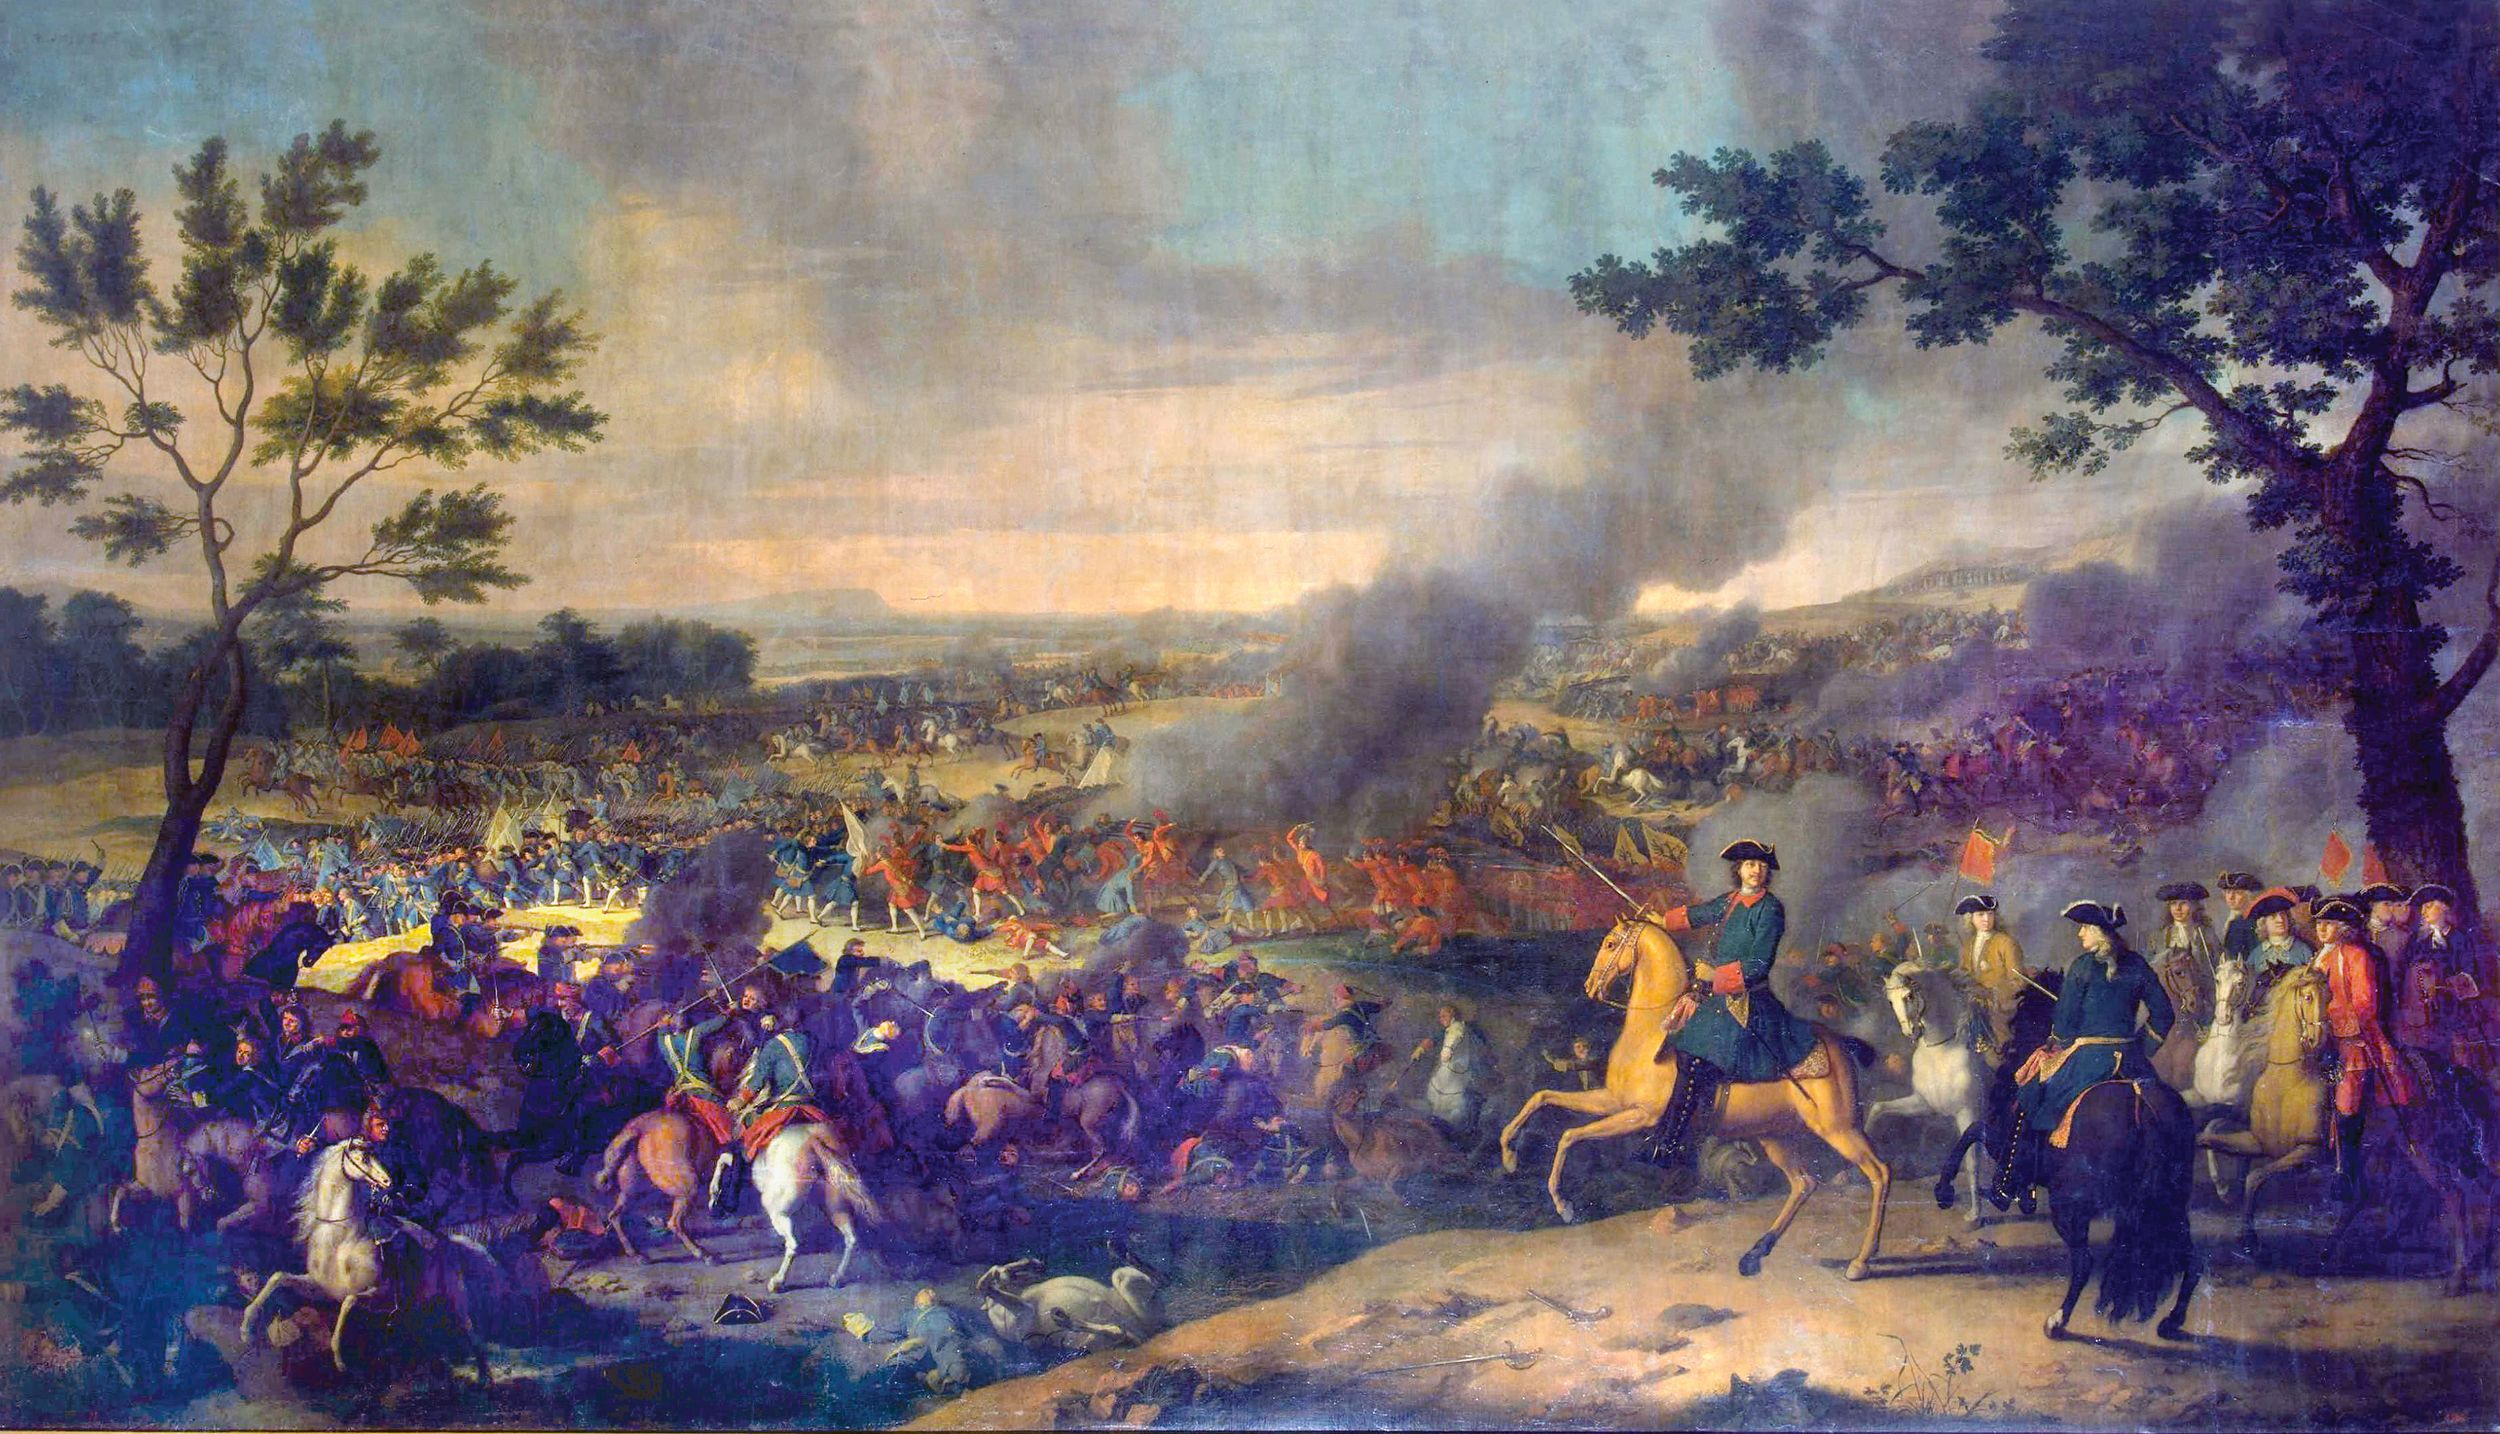 At the Battle of Poltova the Swedish army was forced to retreat  for the first time in the reign of King Charles XII, and Peter (mounted, right of center) was waiting.  As the battered Swedes withdrew, 30,000 fresh Russian reserves, backed by artillery, fell upon them.